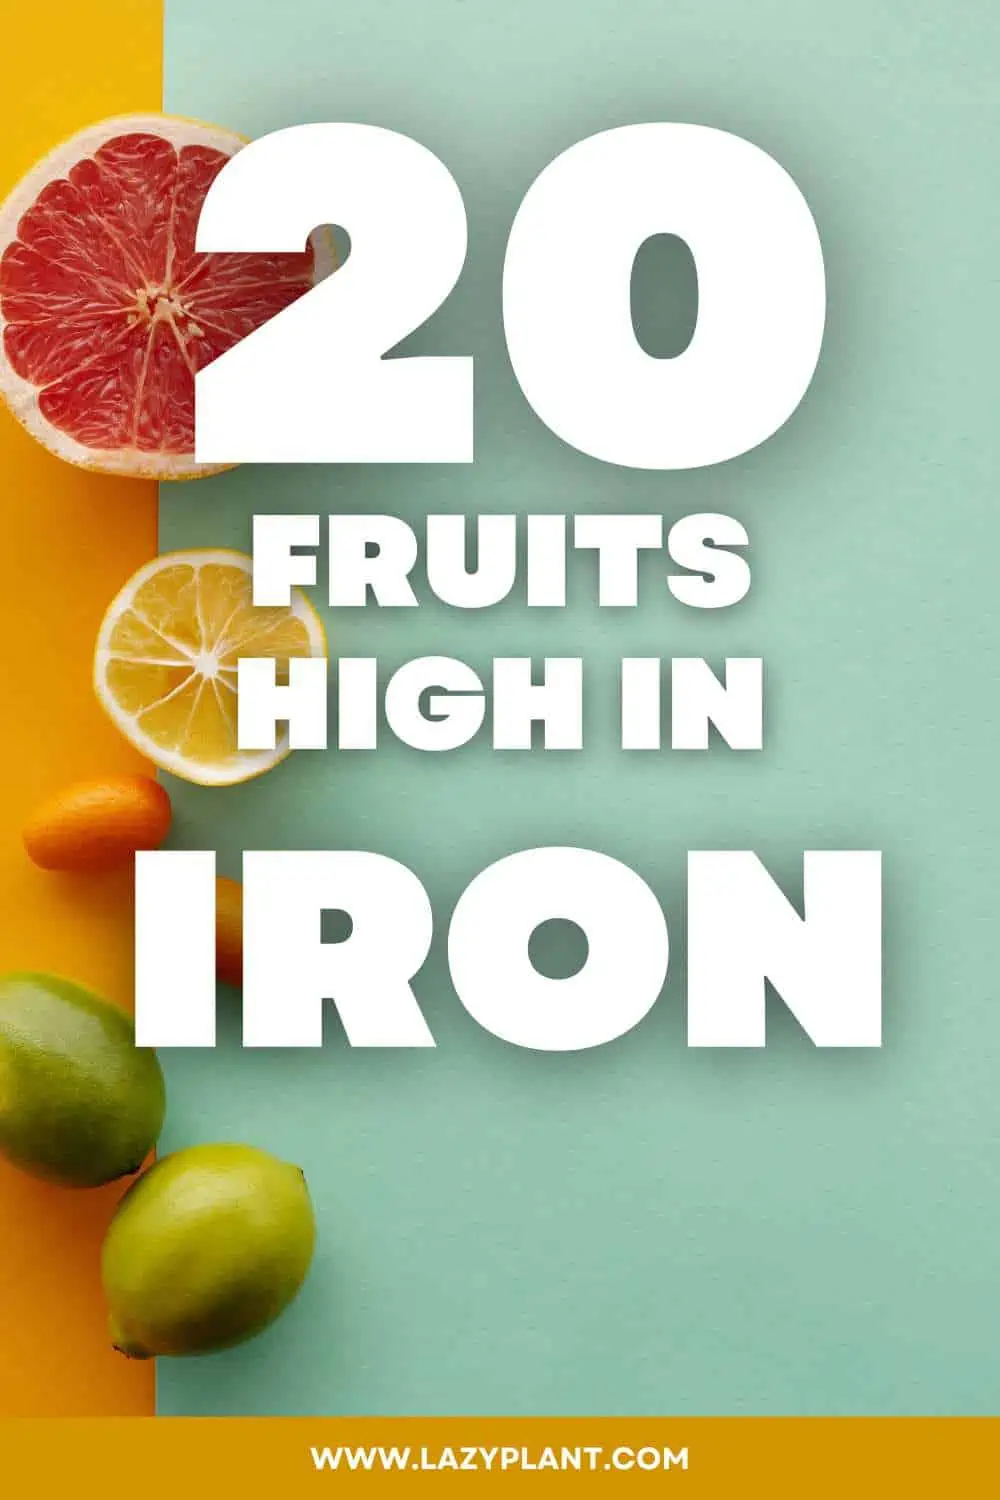 A list of common fruits naturally high in iron.